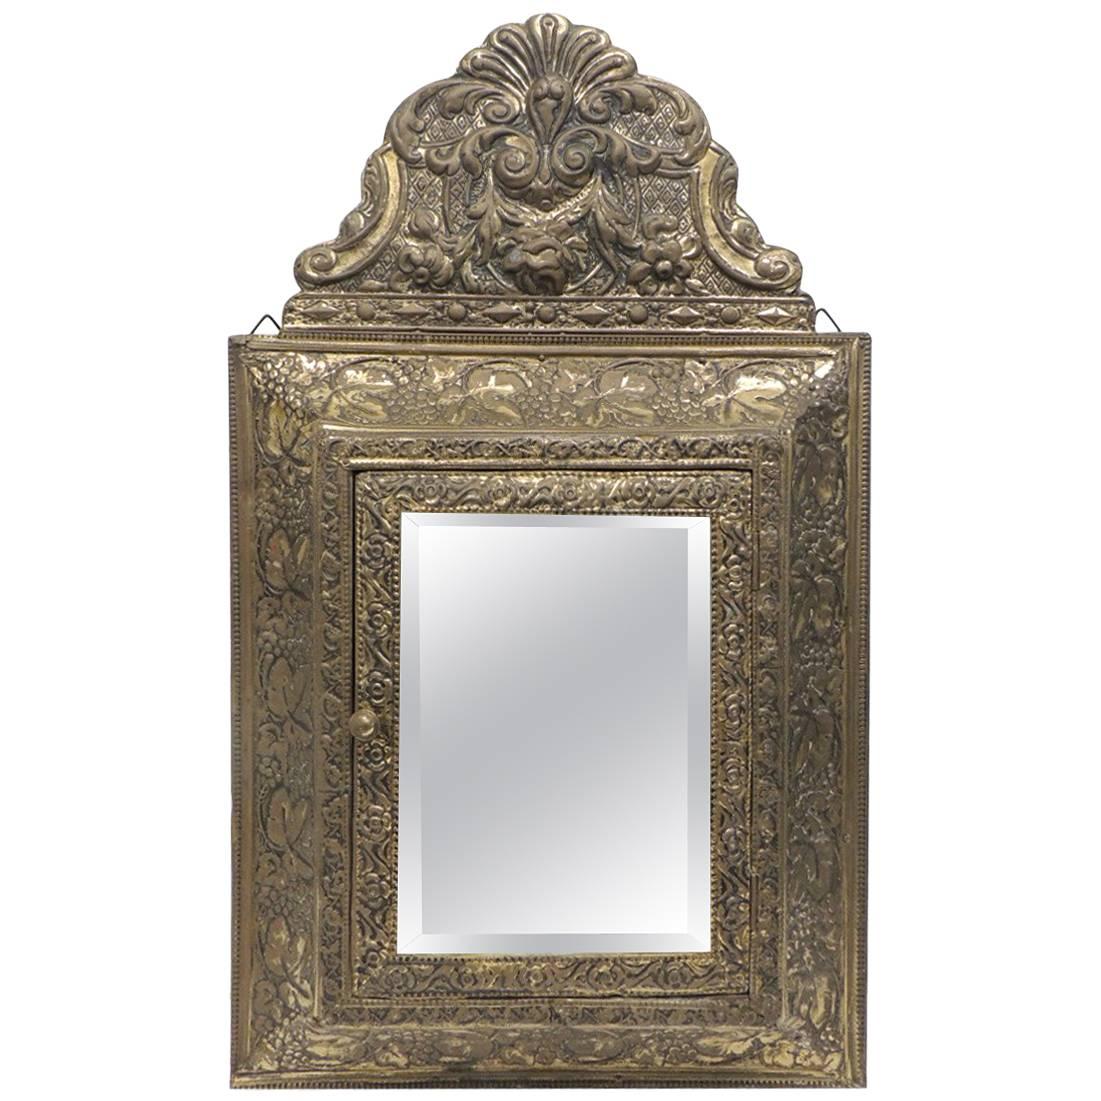 CLOSE OUT SALE: Antique Brass Vanity Reliquary with Mirrored Door & Coat Brushes